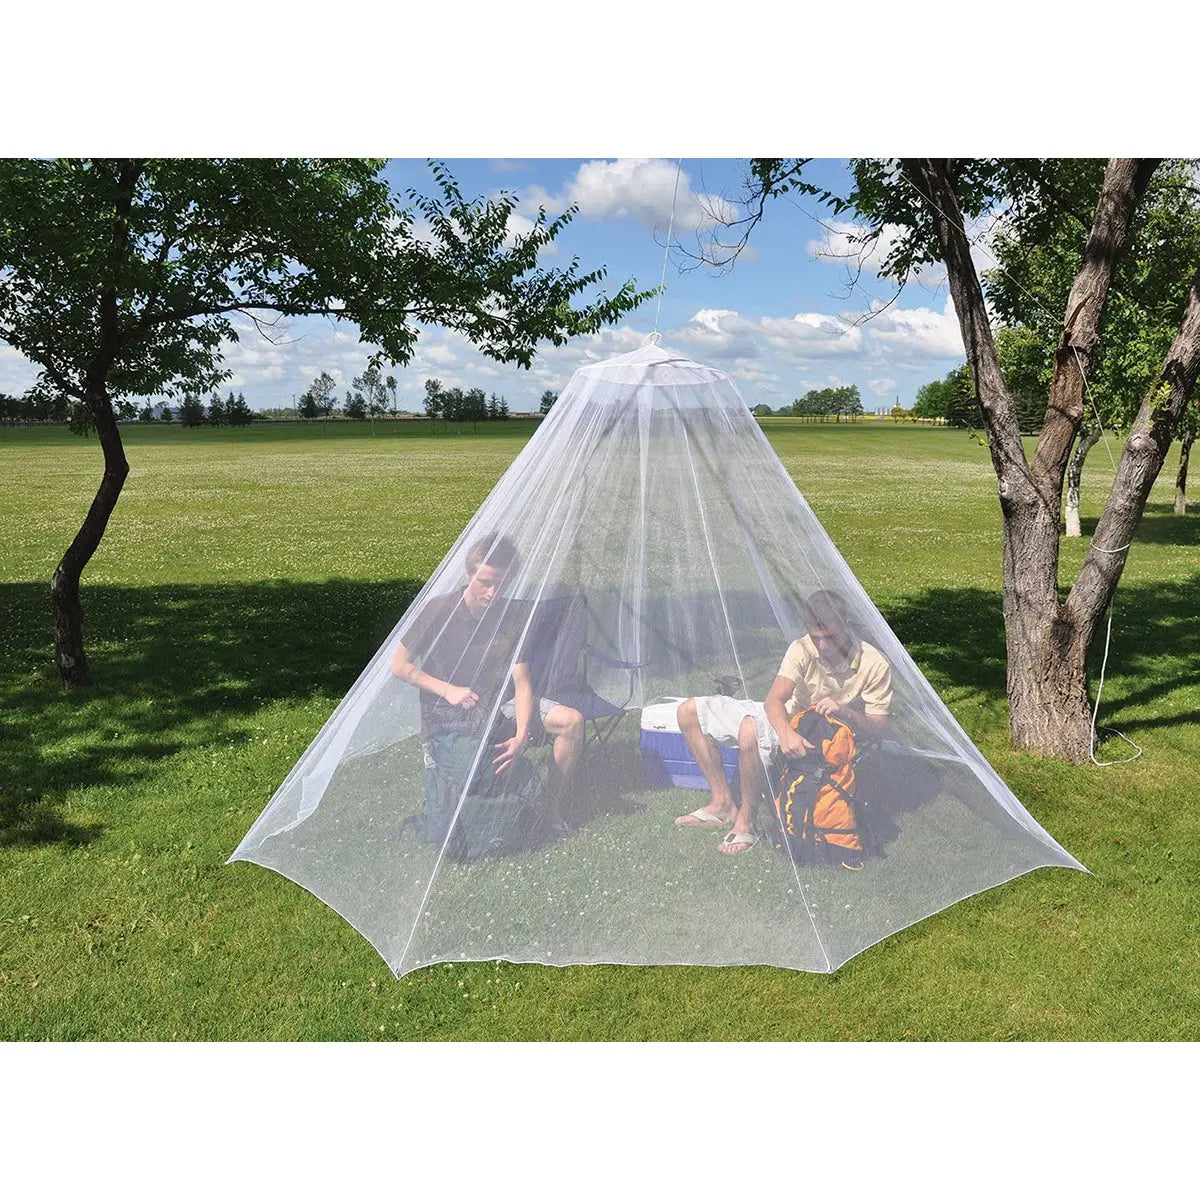 Coghlan's Mosquito Netting, 48" x 72", Mesh Polyester Net Protects from Insects Coghlan's